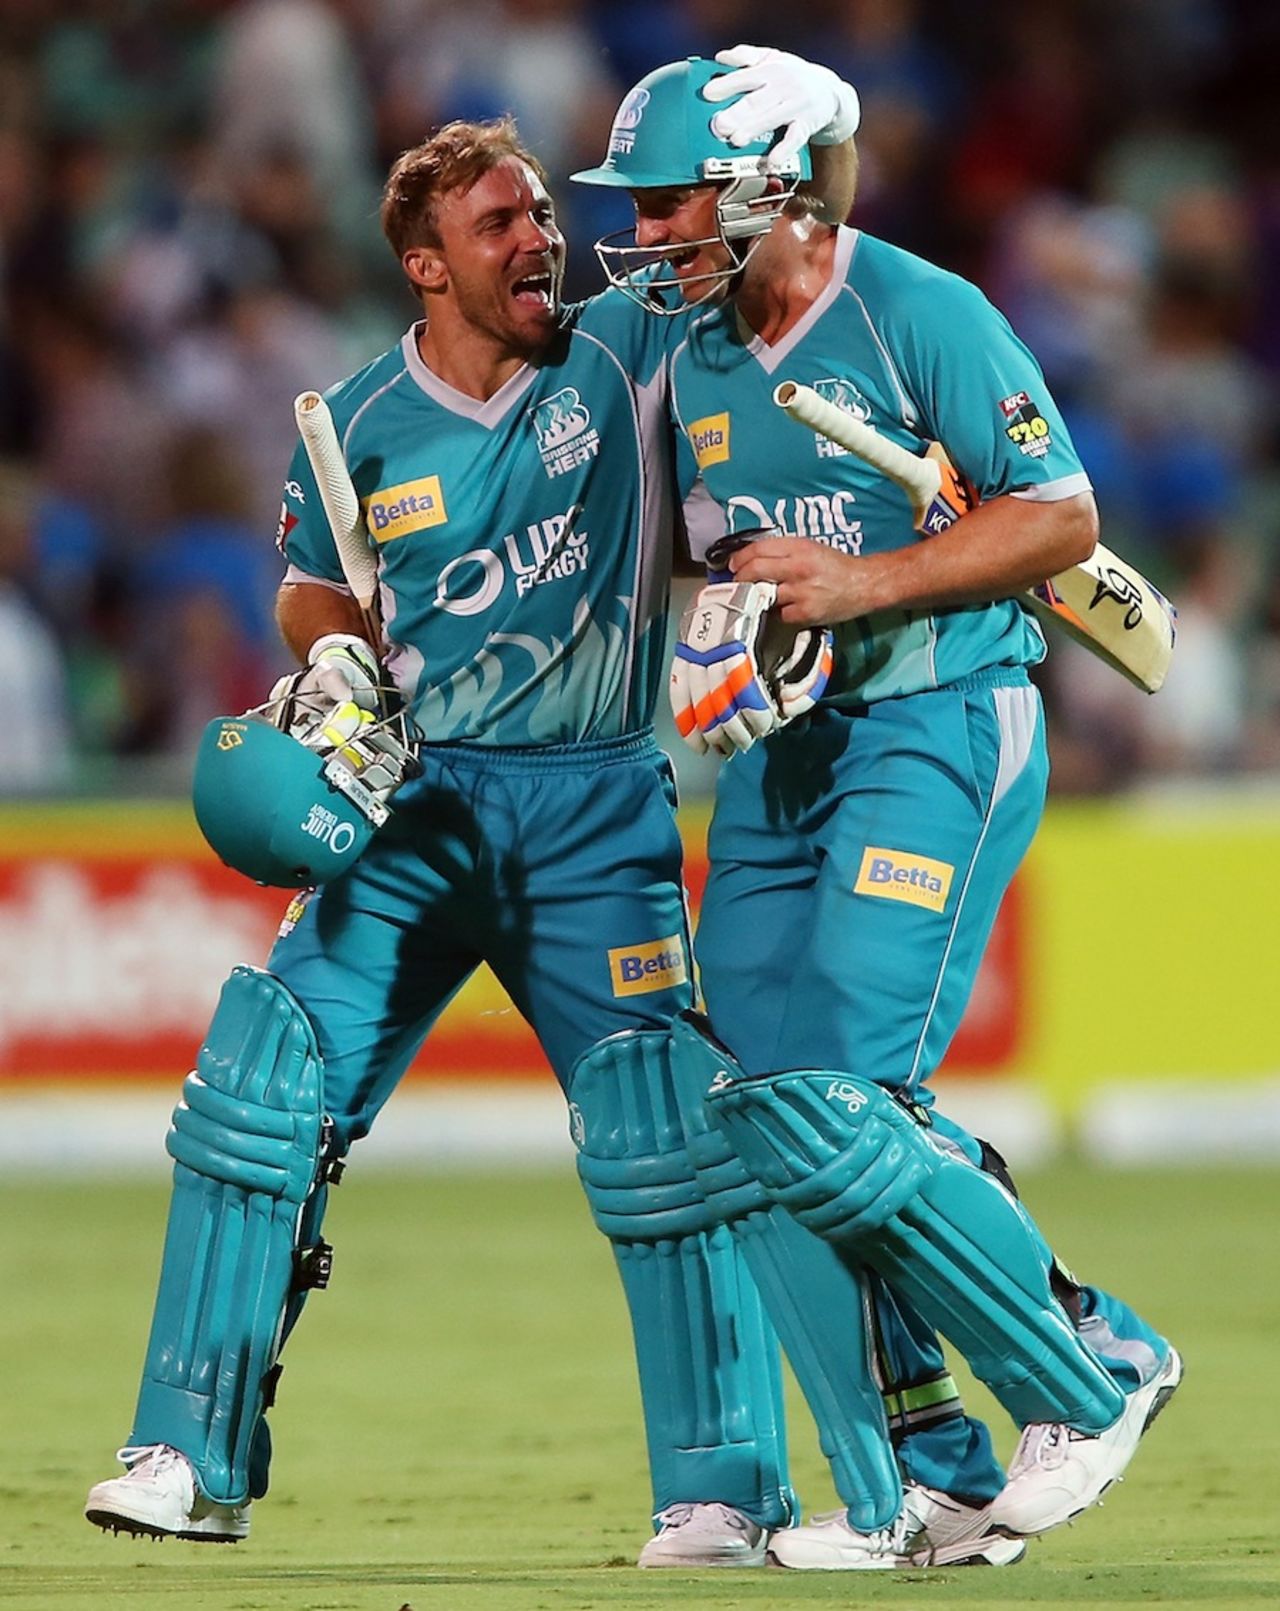 Peter Forrest and Chris Hartley are all smiles after their last-ball win, Adelaide Strikers v Brisbane Heat, Big Bash League, Adelaide, December 13, 2012